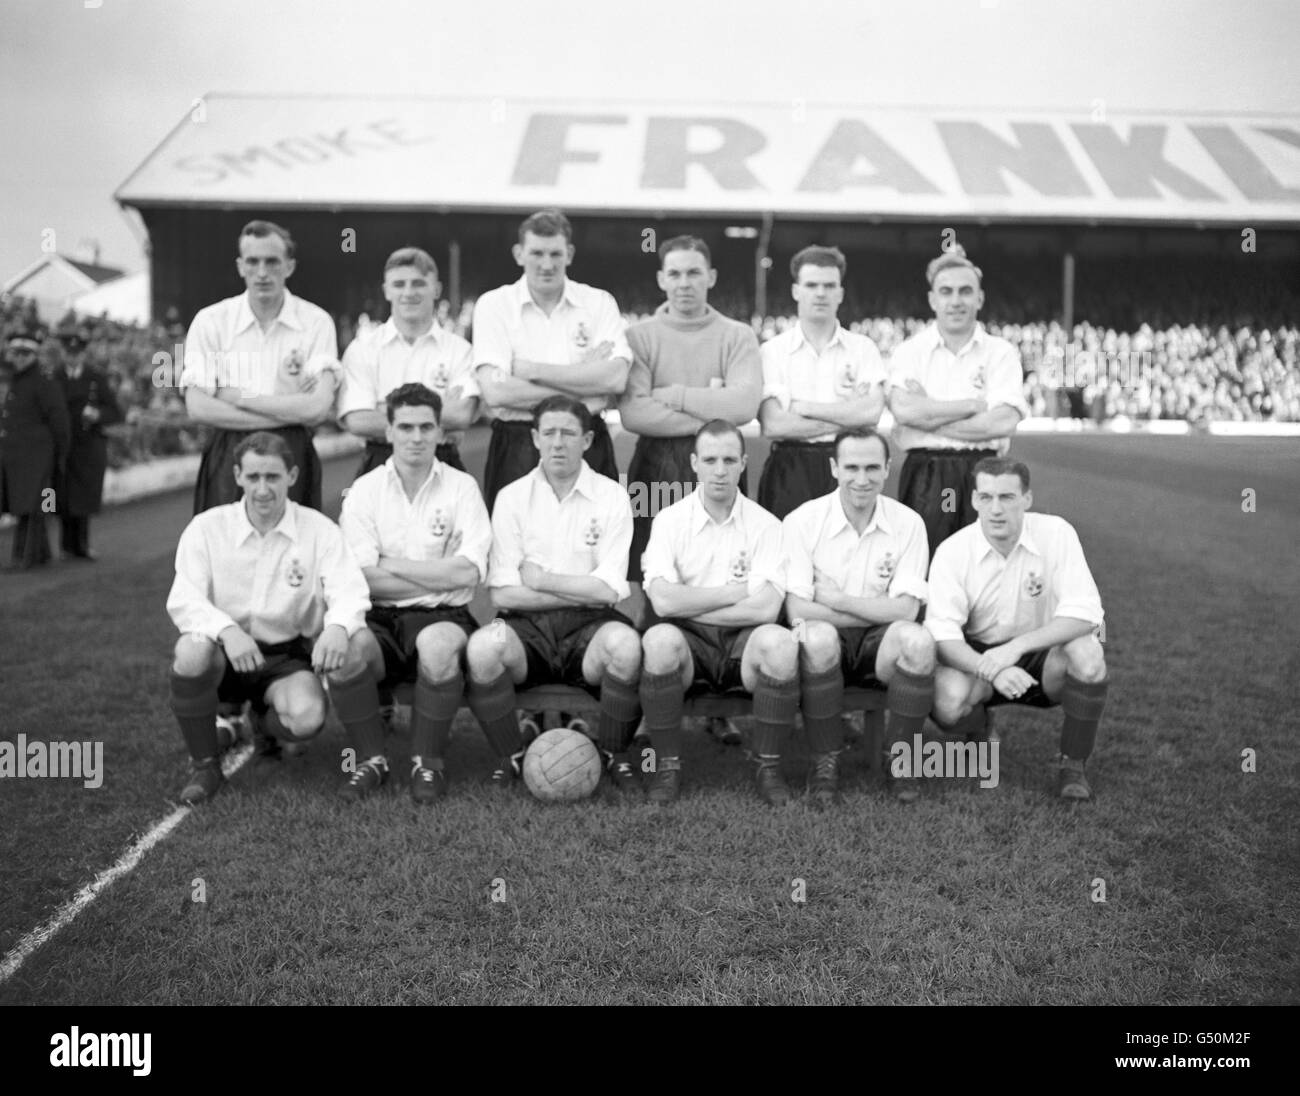 The Rest of the United Kingdom team ahead of the match which finished 3-2 to Wales. (back l-r) Charlie Fleming (East Fife), Tommy Docherty (Preston North End), George Young (Rangers), Tom Cowan (Morton), Alf McMichael (Newcastle United) and Billy Wright (Wolverhampton Wanderers). (front l-r) Sammy Cox (Rangers), Gordon Smith (Hibernian), Jack Vernon (West Bromwich Albion), Eddie Baily (Tottenham Hotspur), Les Medley (Tottenham Hotspur) and Nat Lofthouse (Bolton Wanderers). Stock Photo